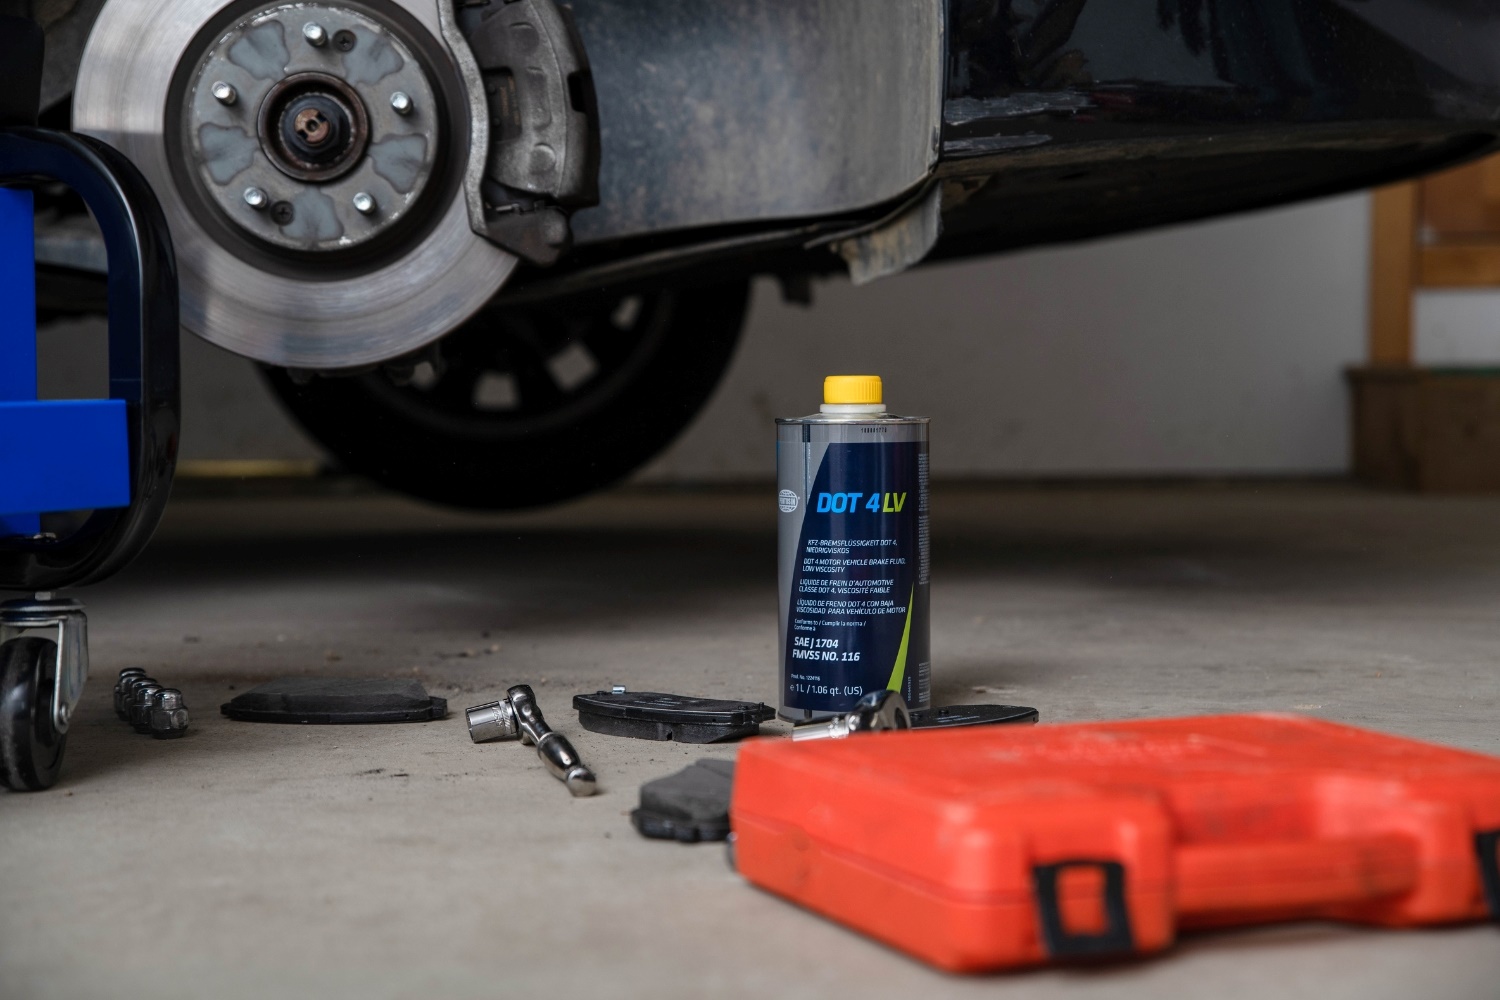 Discover The Secret To Stop Brake Fluid Leaks Instantly - No Repairs Needed!